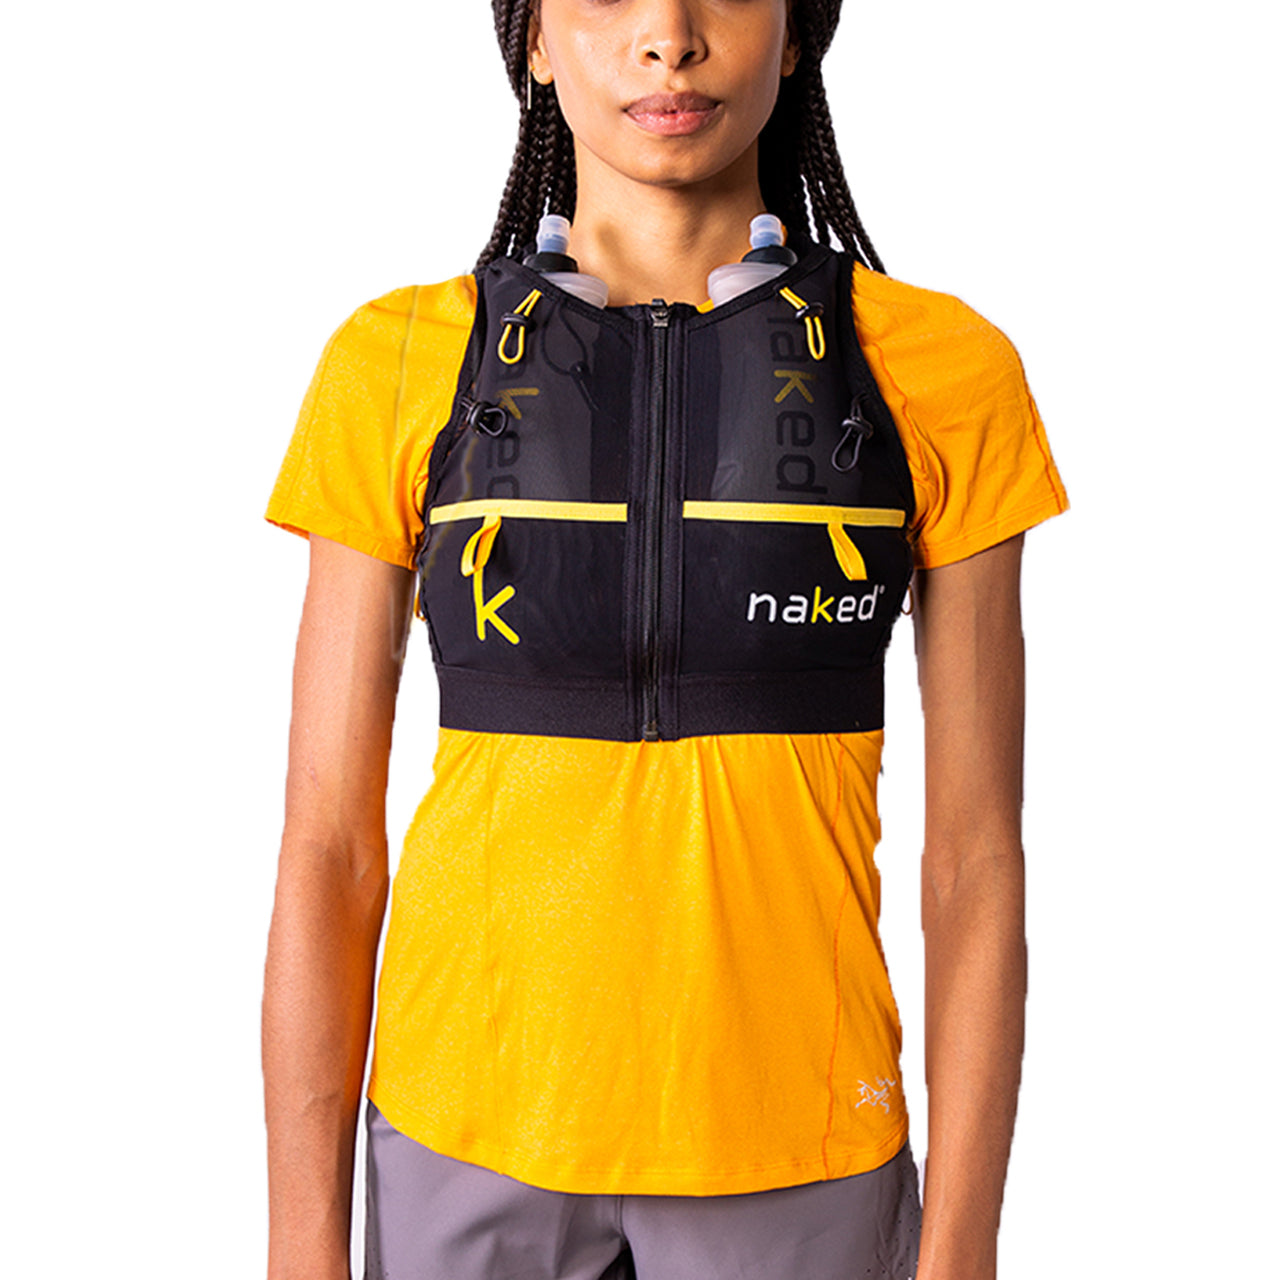 The Running Store - El chaleco para correr Naked® ultraligero